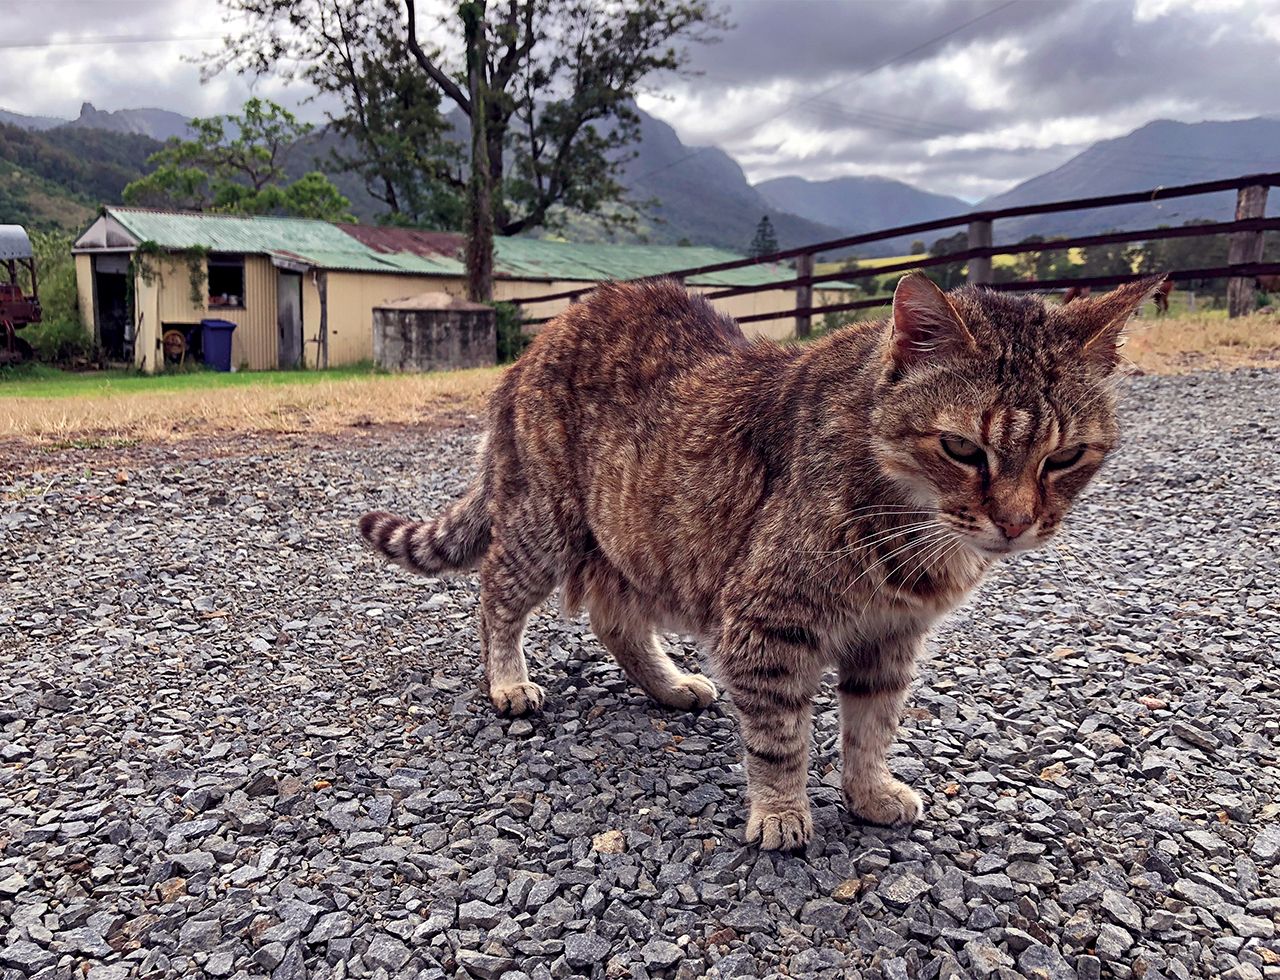 Diseases spread by cats have a $6 billion impact on health and agriculture every year